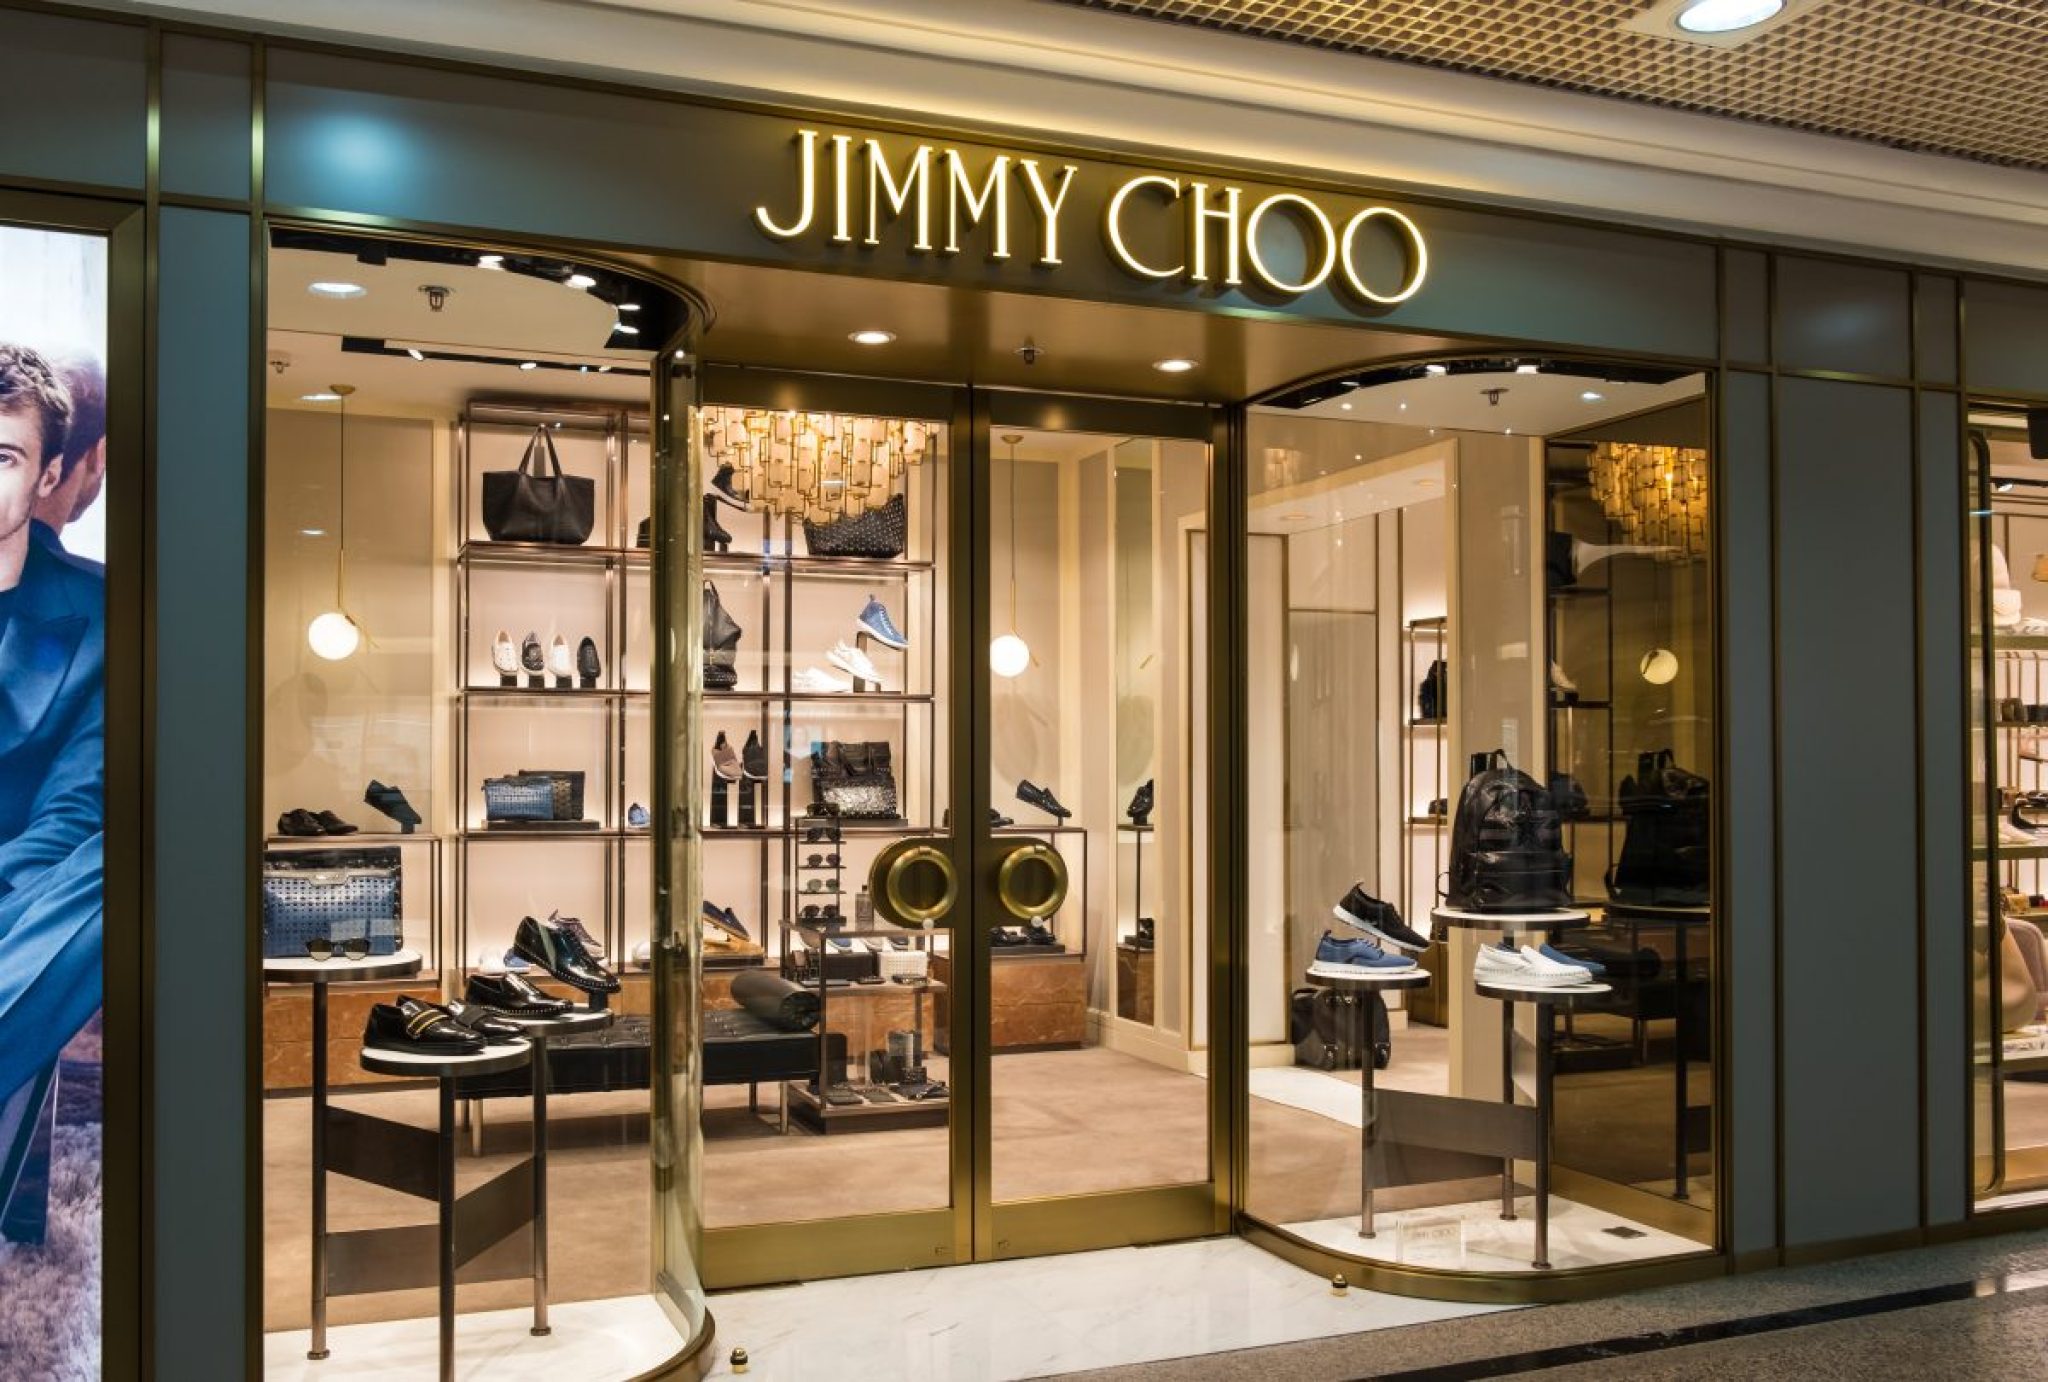 Jimmy Choo Shoe Size Chart What Makes Them Special? The Shoe Box NYC